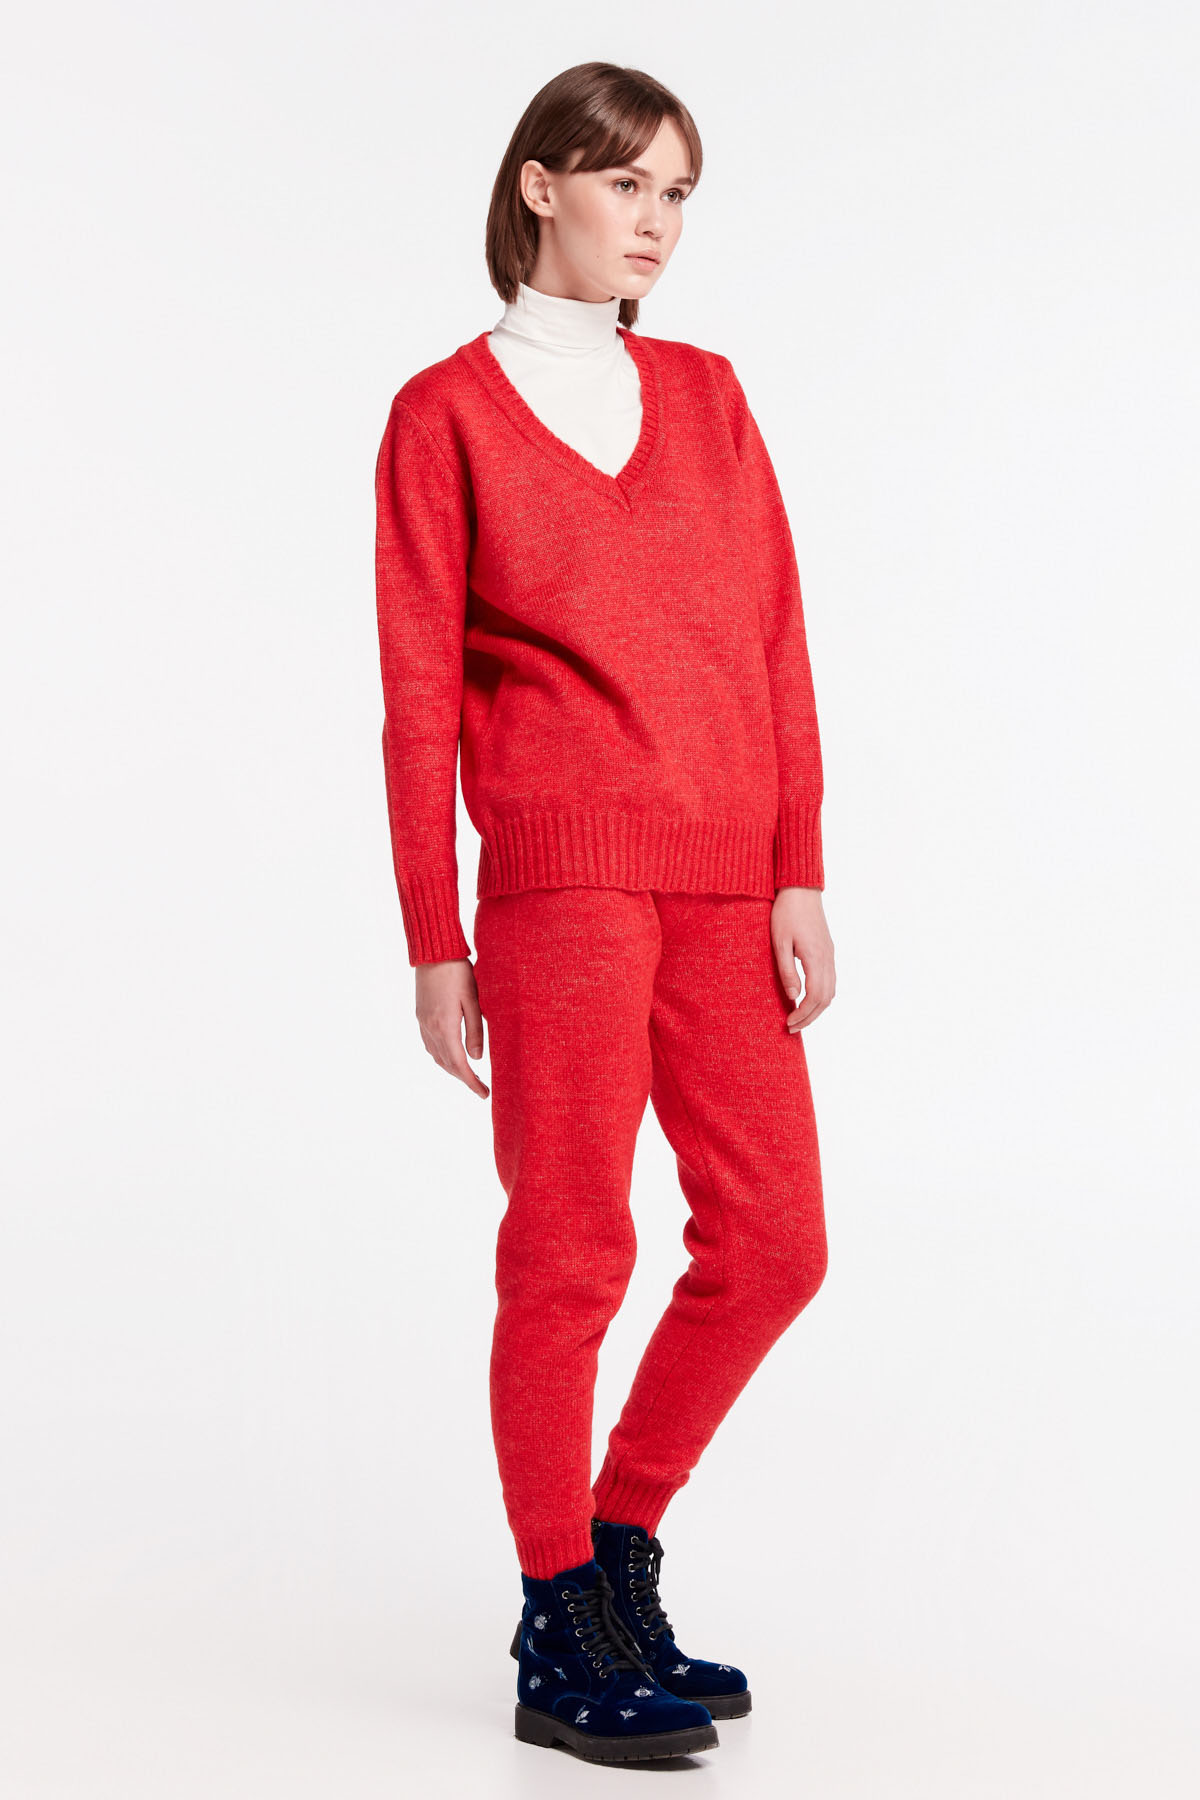 Red V-neck sweater, photo 12